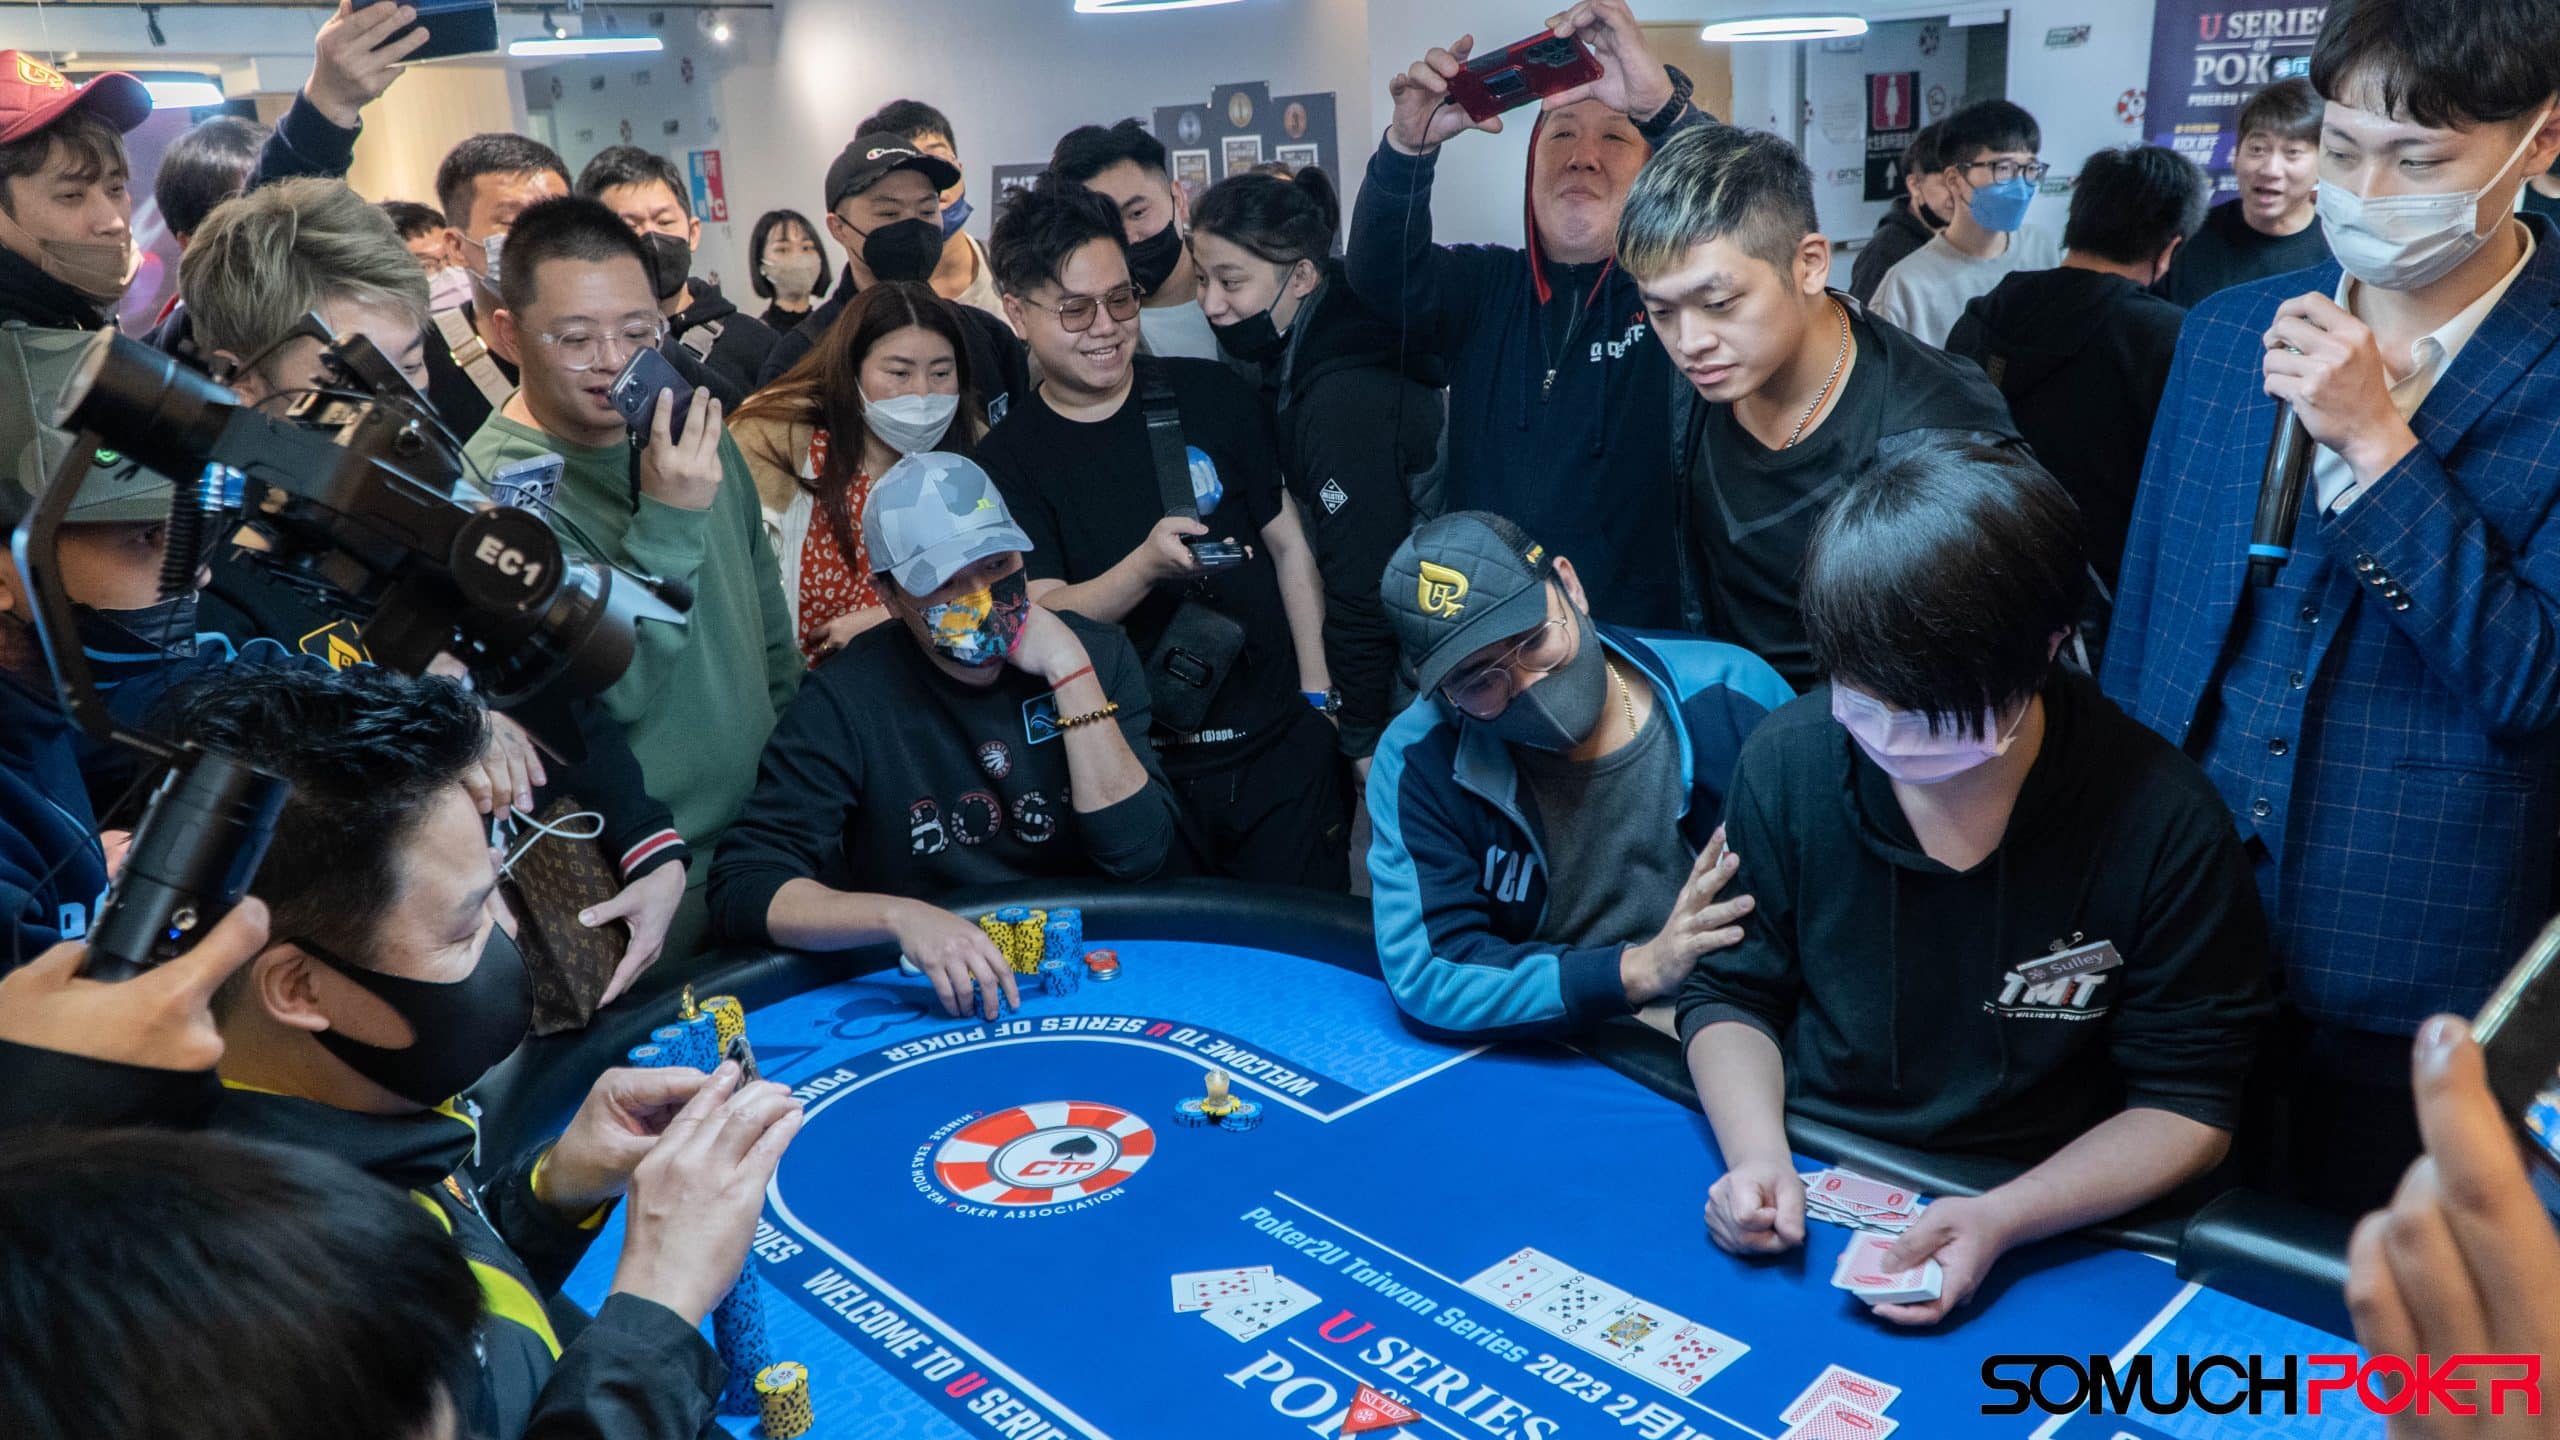 USOP: Poker2U Taiwan Series Main Event shatters guarantee, draws 1,043; Ching Wei Chen 陳靖惟 leads 132 players into Day 2